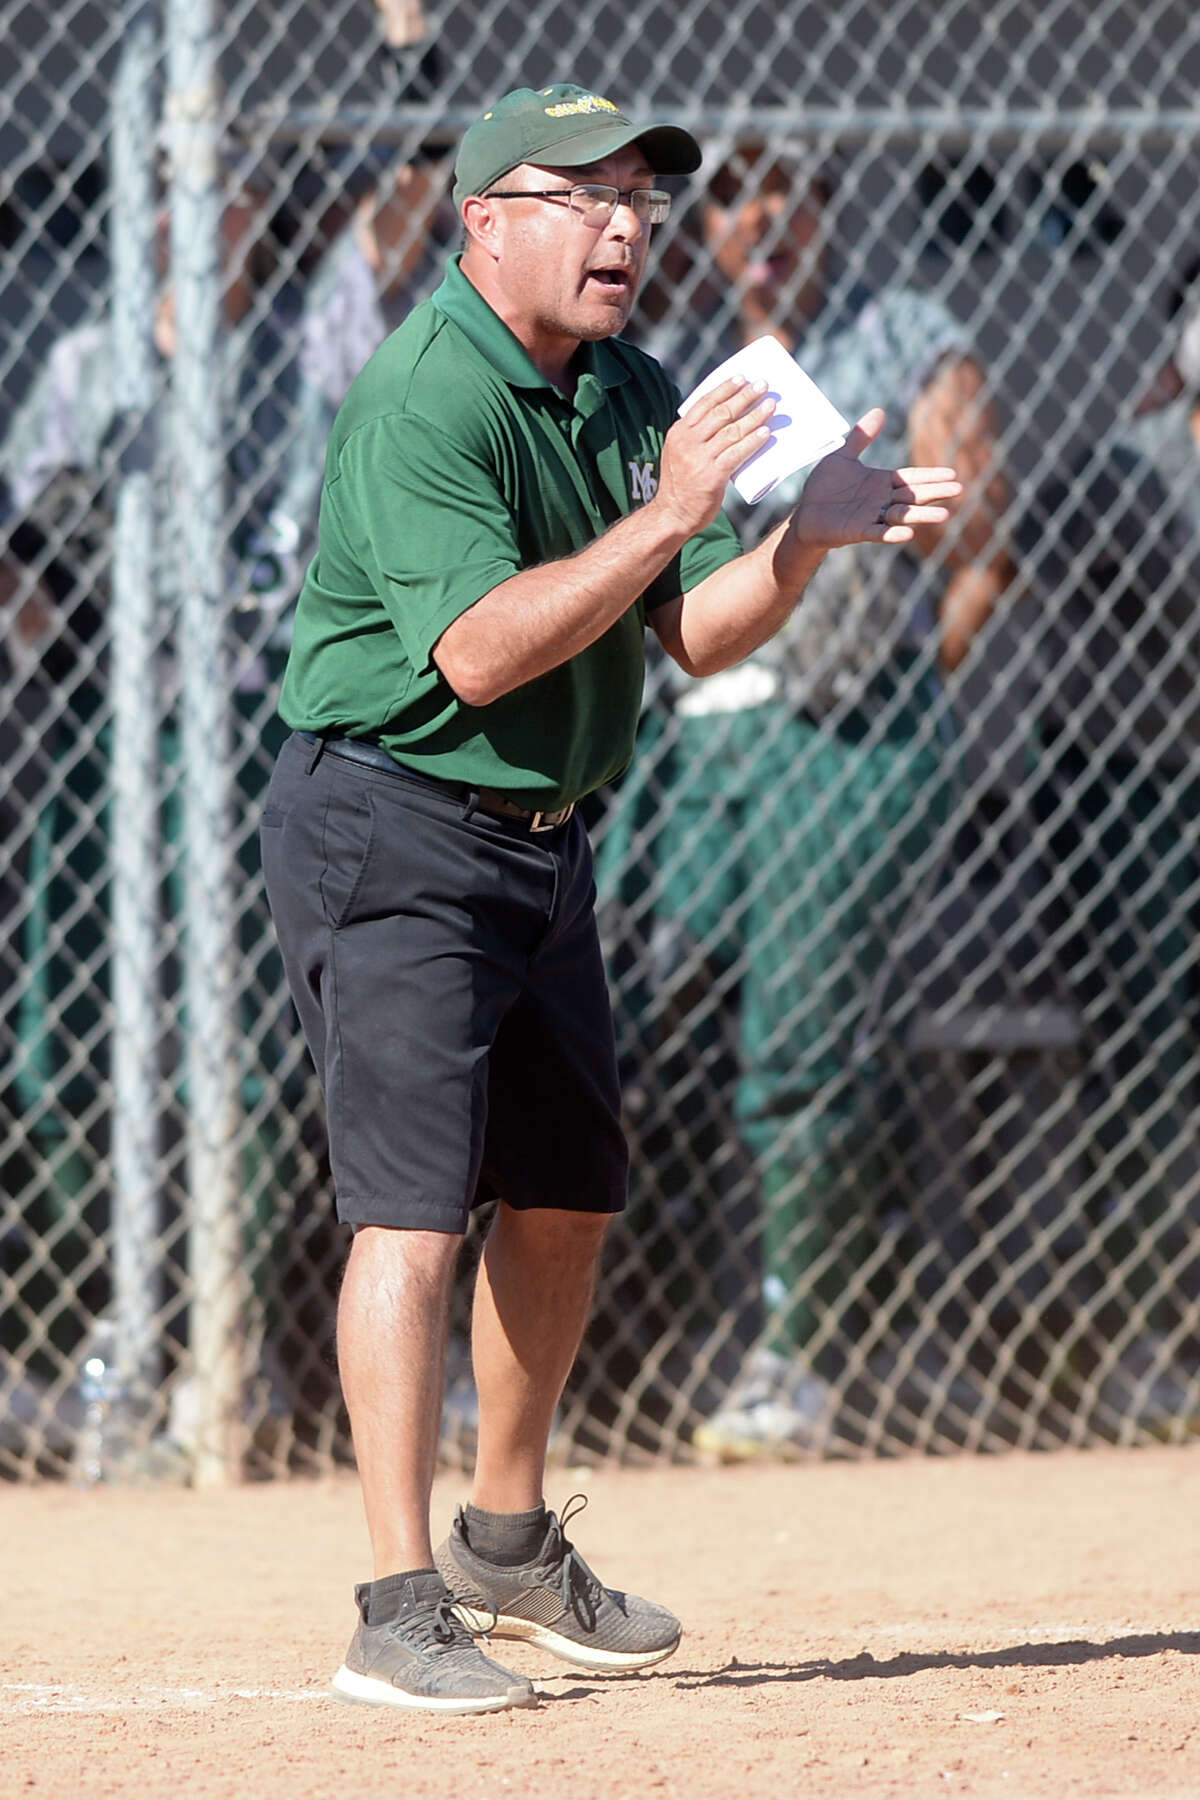 Midland College softball head coach Tommy Ramos looks on during the game against Lamar College on Saturday, Feb. 11, 2017, at Chaparral Center. James Durbin/Reporter-Telegram